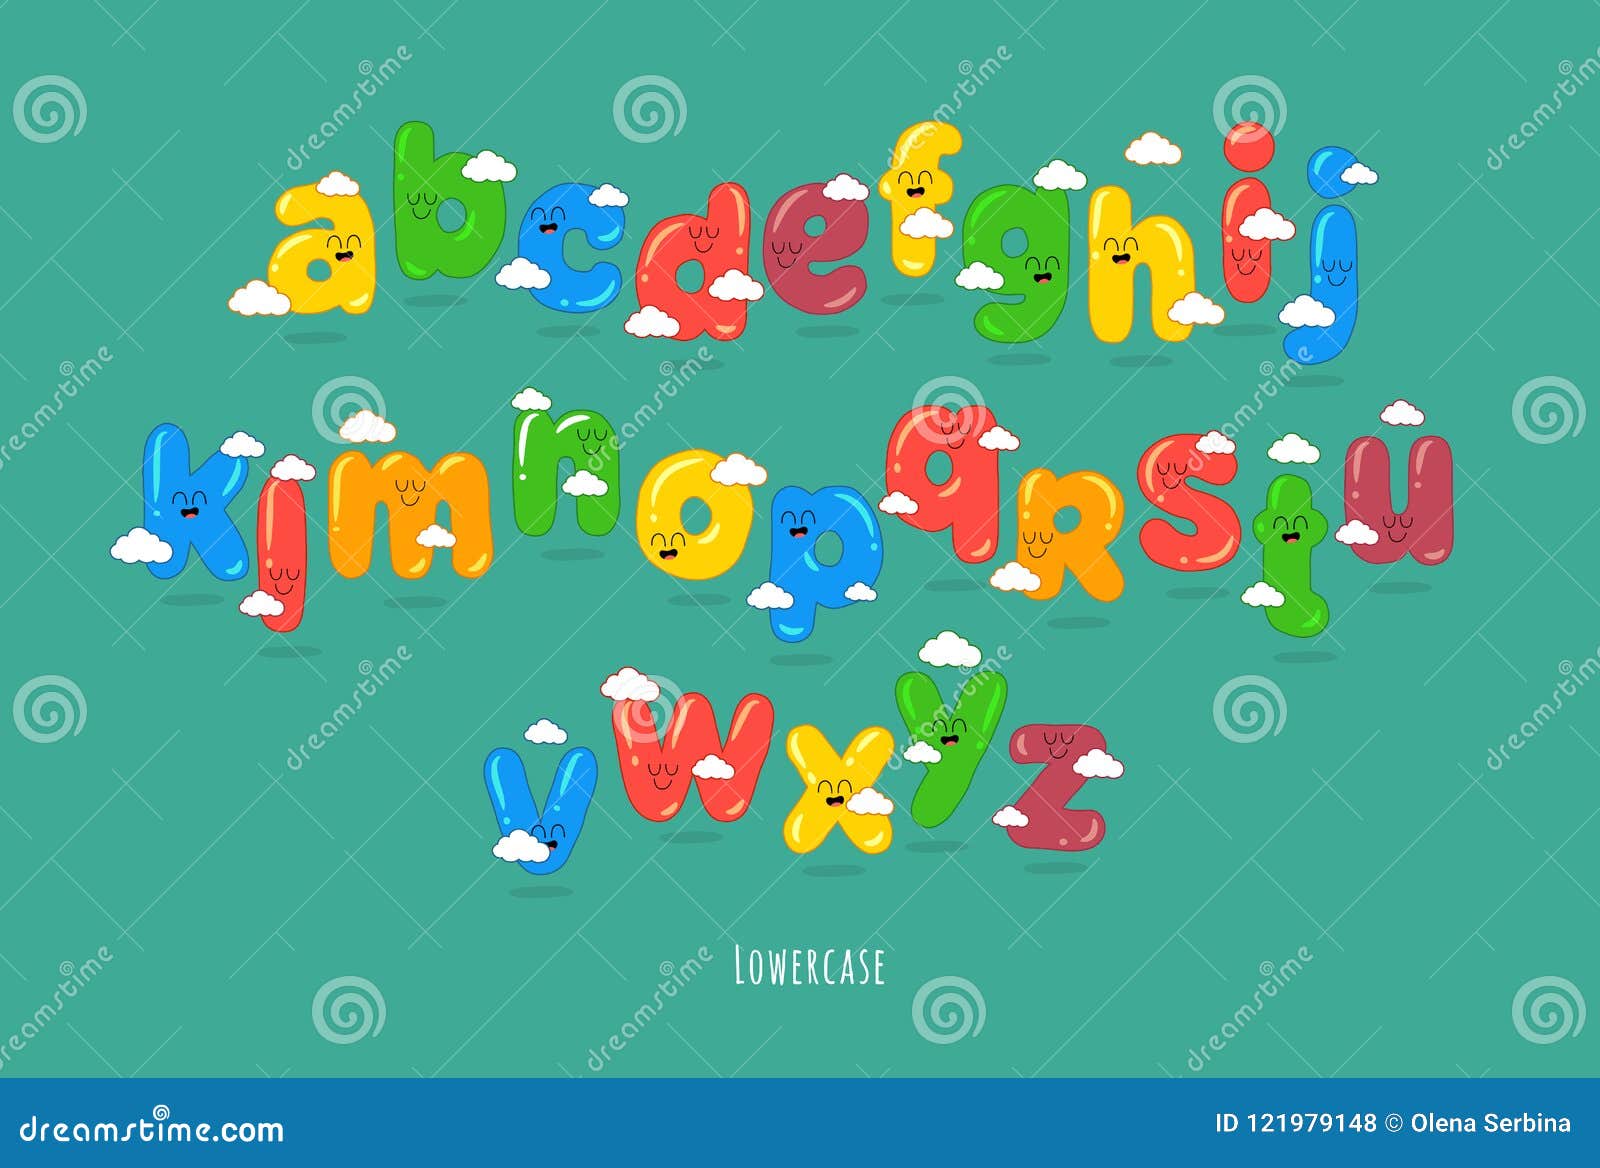 Funny Titles Stock Illustrations – 130 Funny Titles Stock Illustrations,  Vectors & Clipart - Dreamstime